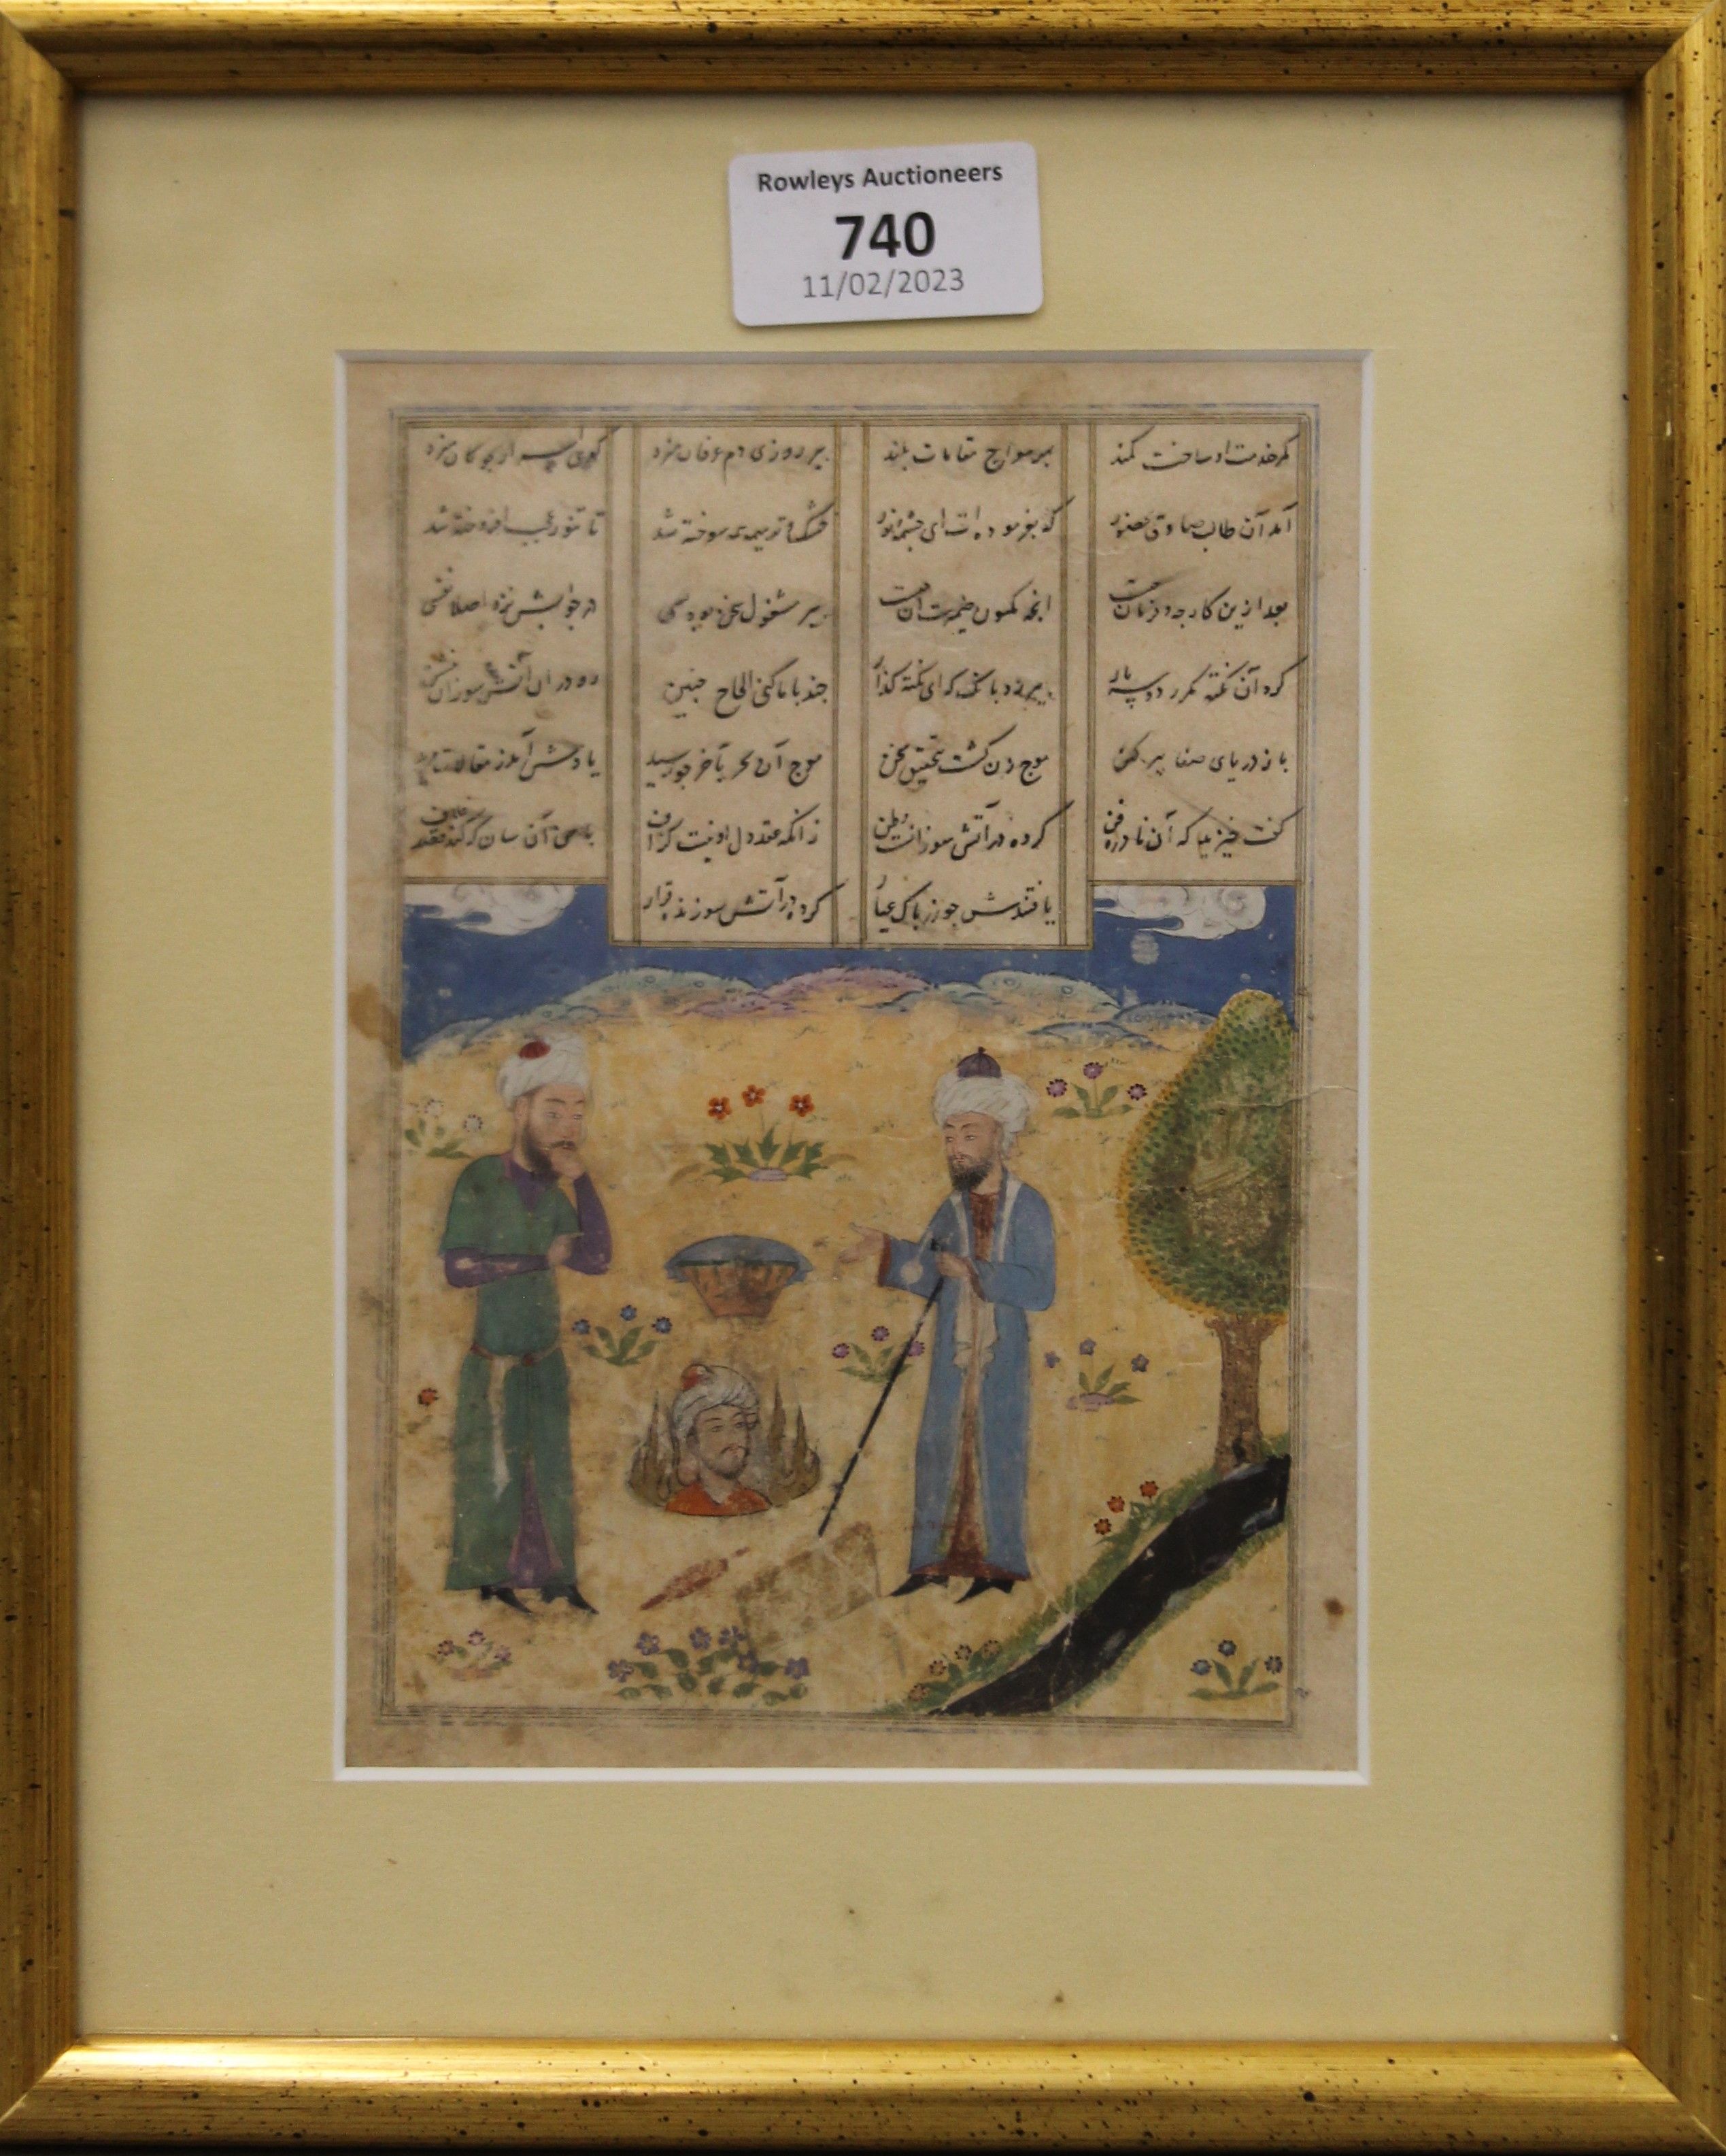 An early manuscript, possibly Persian or Arabic, painted with figures, framed and glazed. 12.5 x 17. - Image 2 of 4